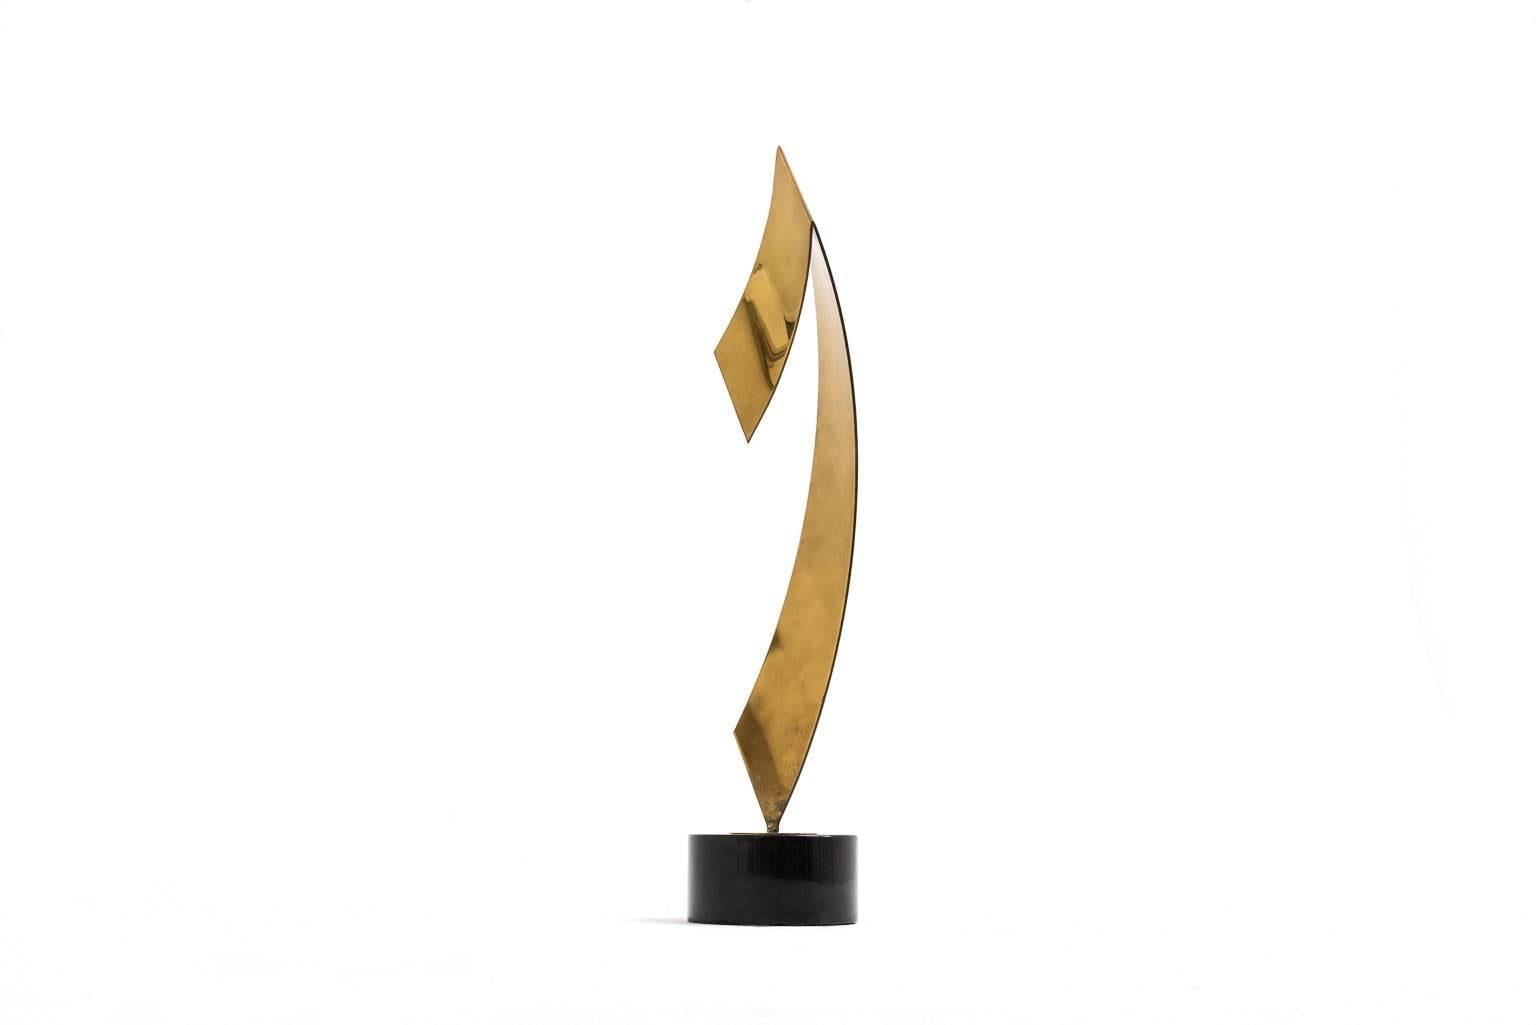 Abstract brass sculpture by Yvonne Tindas, France, 1970s. Tindas is best know for her jewelry designs, her sculptures are much more rare. The sculpture has a beautiful sharp but elegant shape and stands on a black marble base. The brass shows a